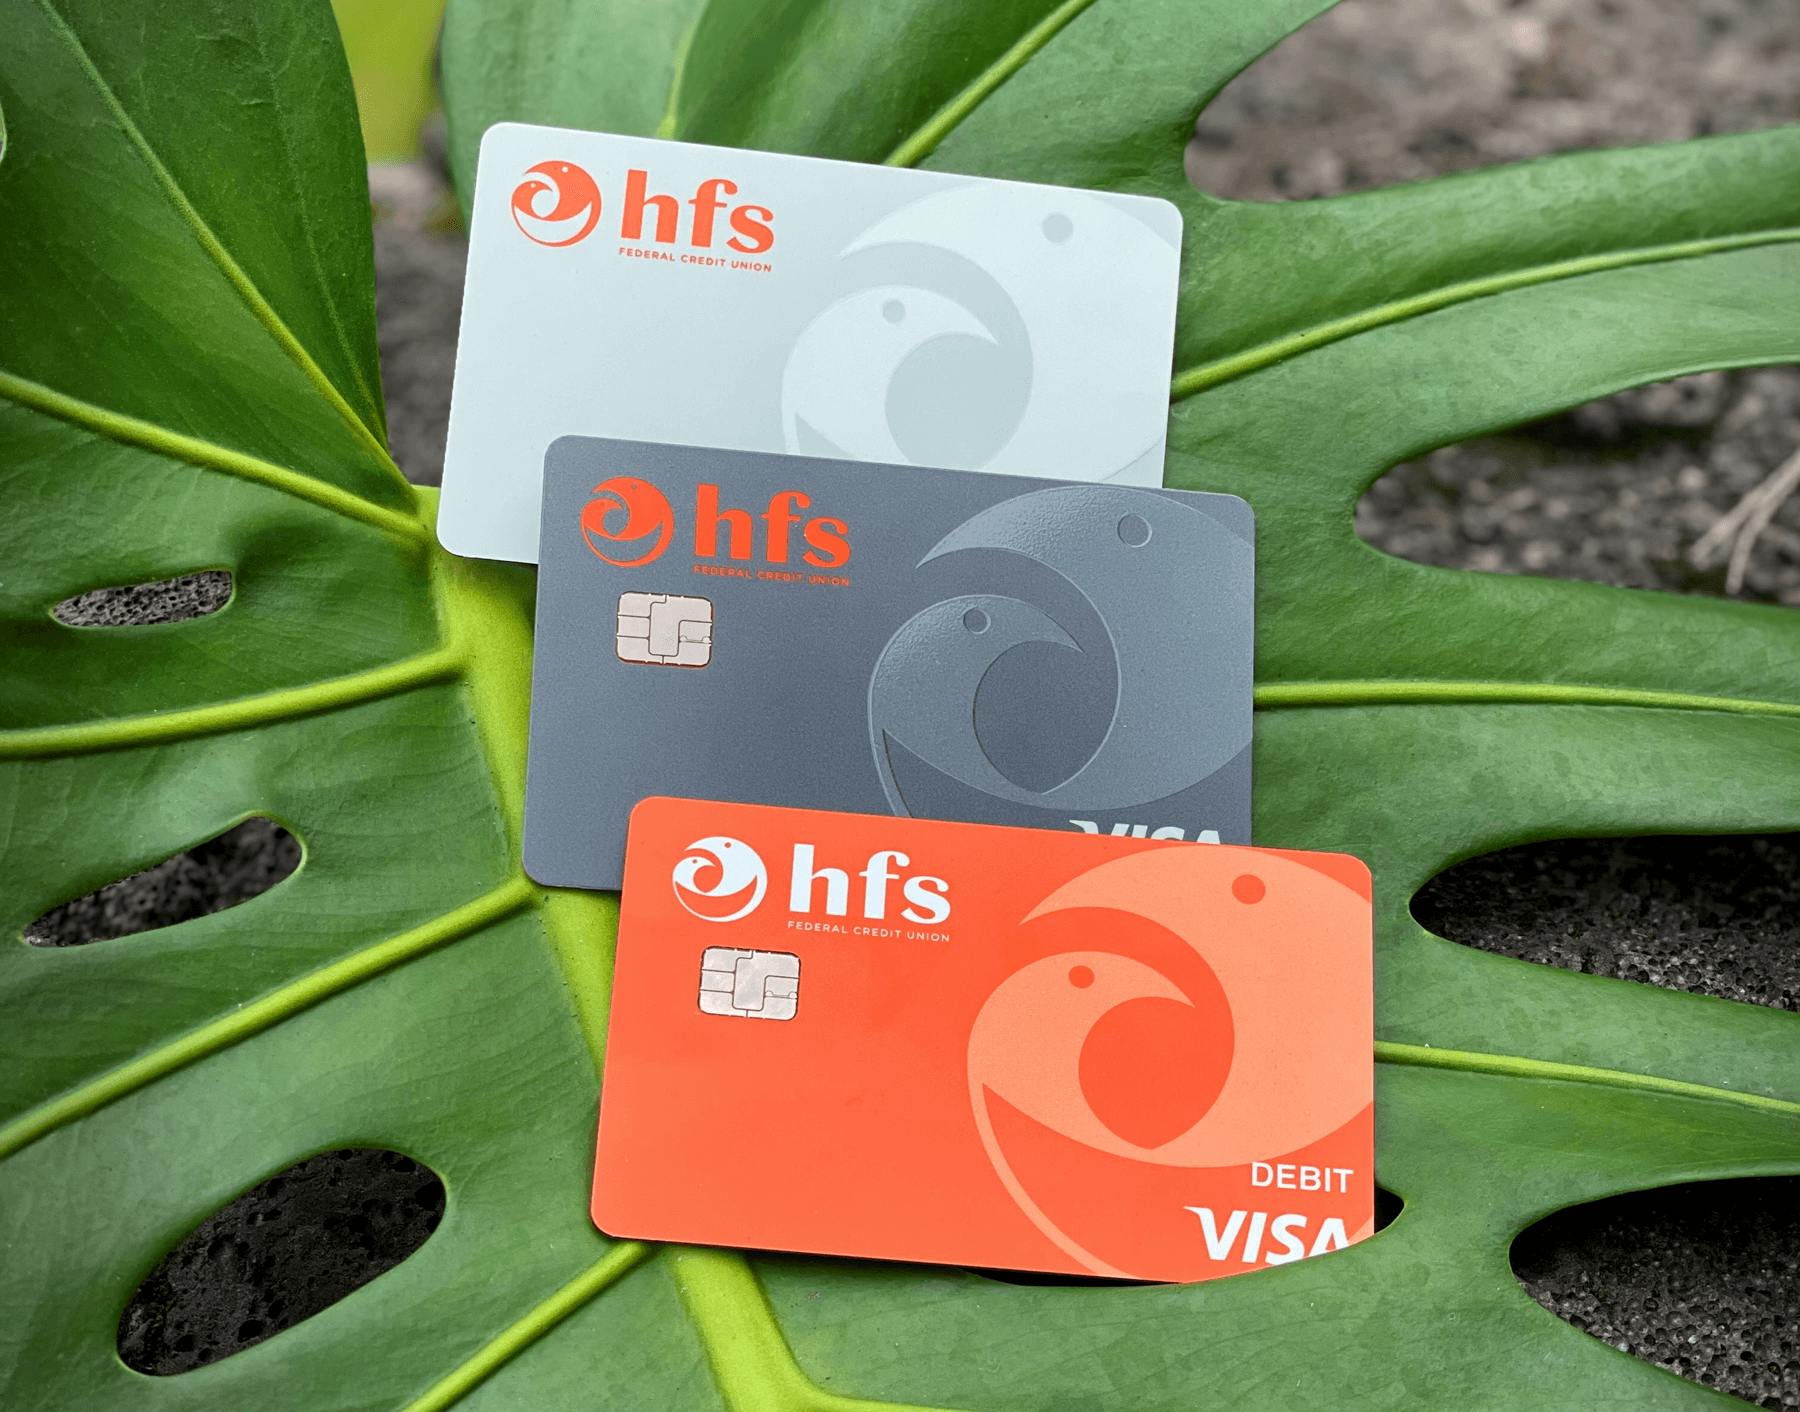 HFS Credit Cards